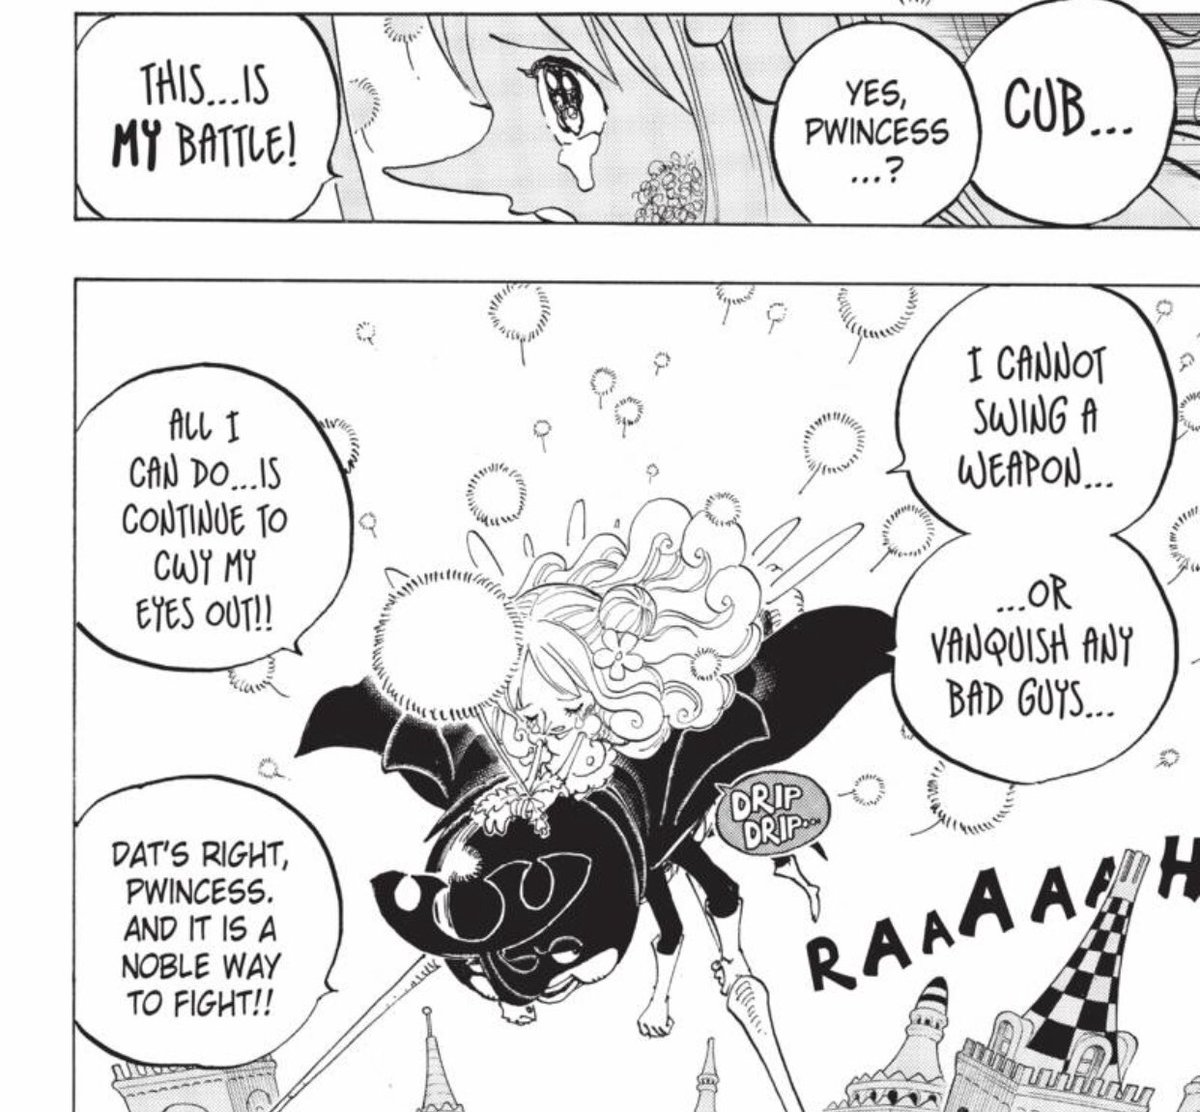 Standout Panel - I think it’s important that the princesses’ concern for the plight of Dressrosa and its people will ultimately be what defeats Doflamingo. Sympathy/empathy/cooperation is making the lasting difference against Doffy’s cruel indifference.  #OPGrant